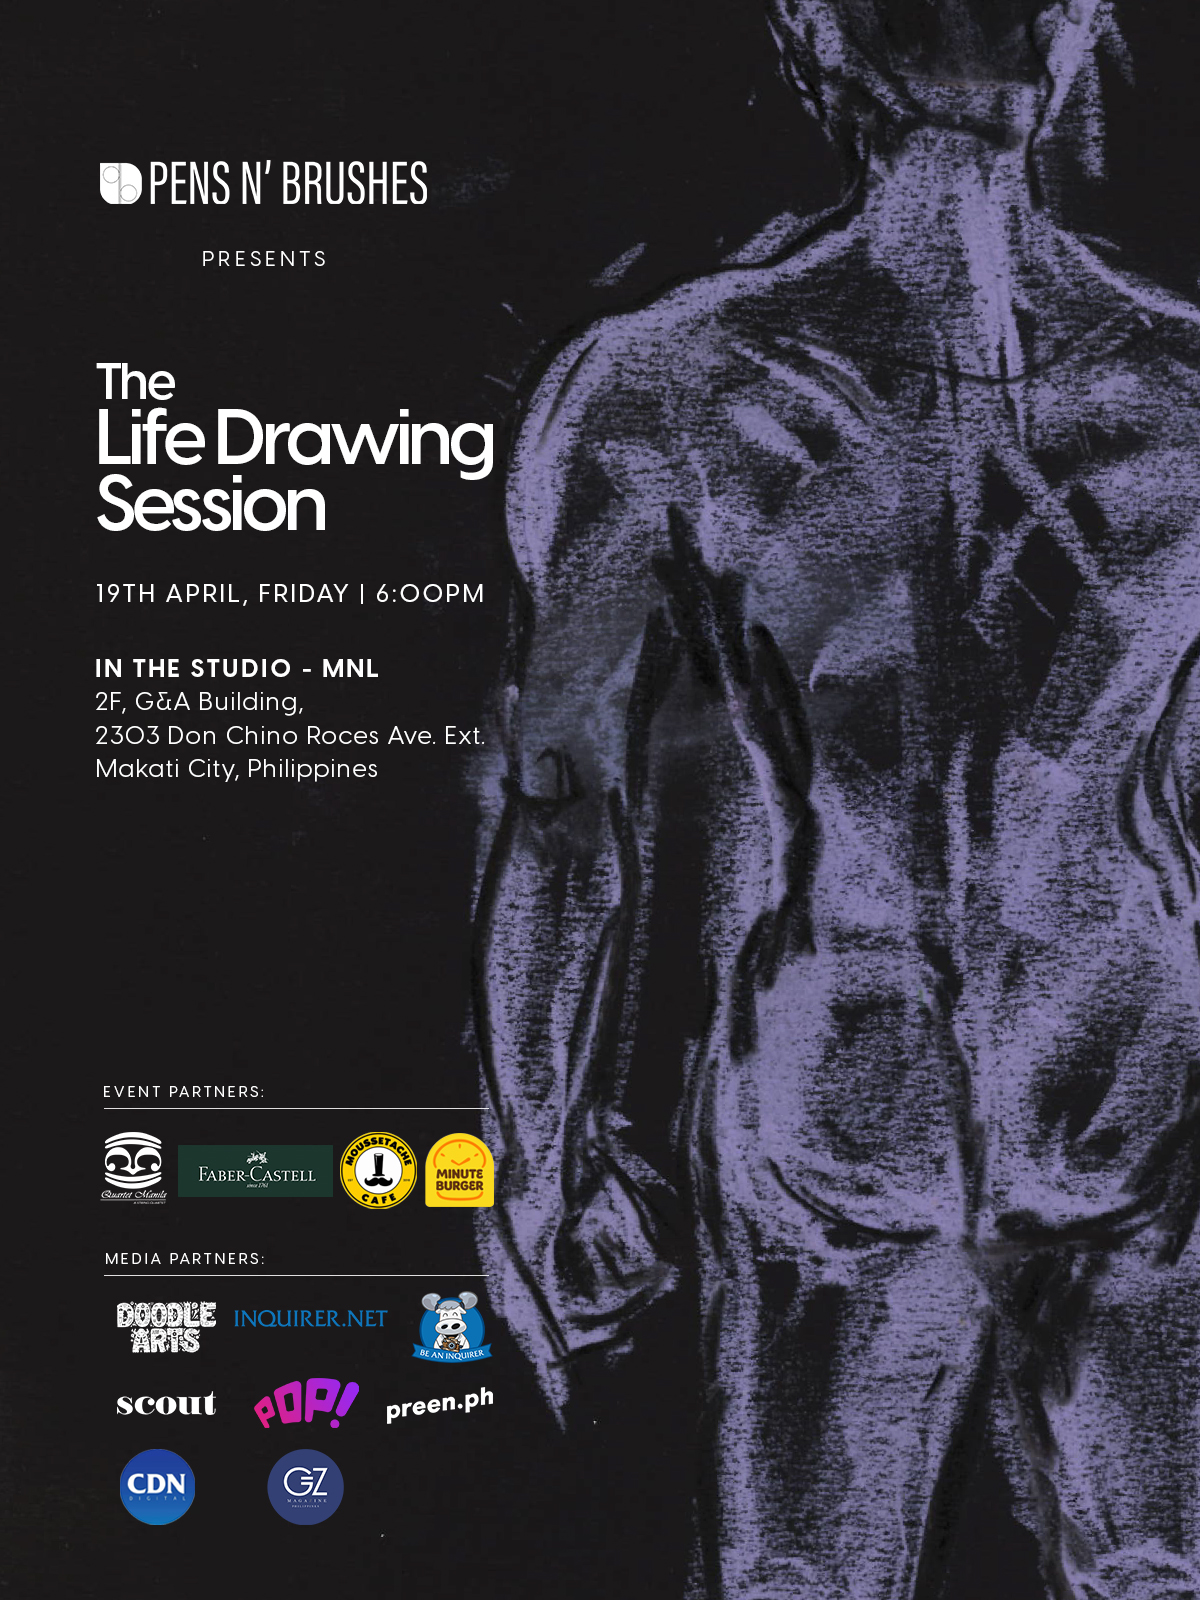 The Revival of The Life Drawing Session Philippines by Pens N’Brushes